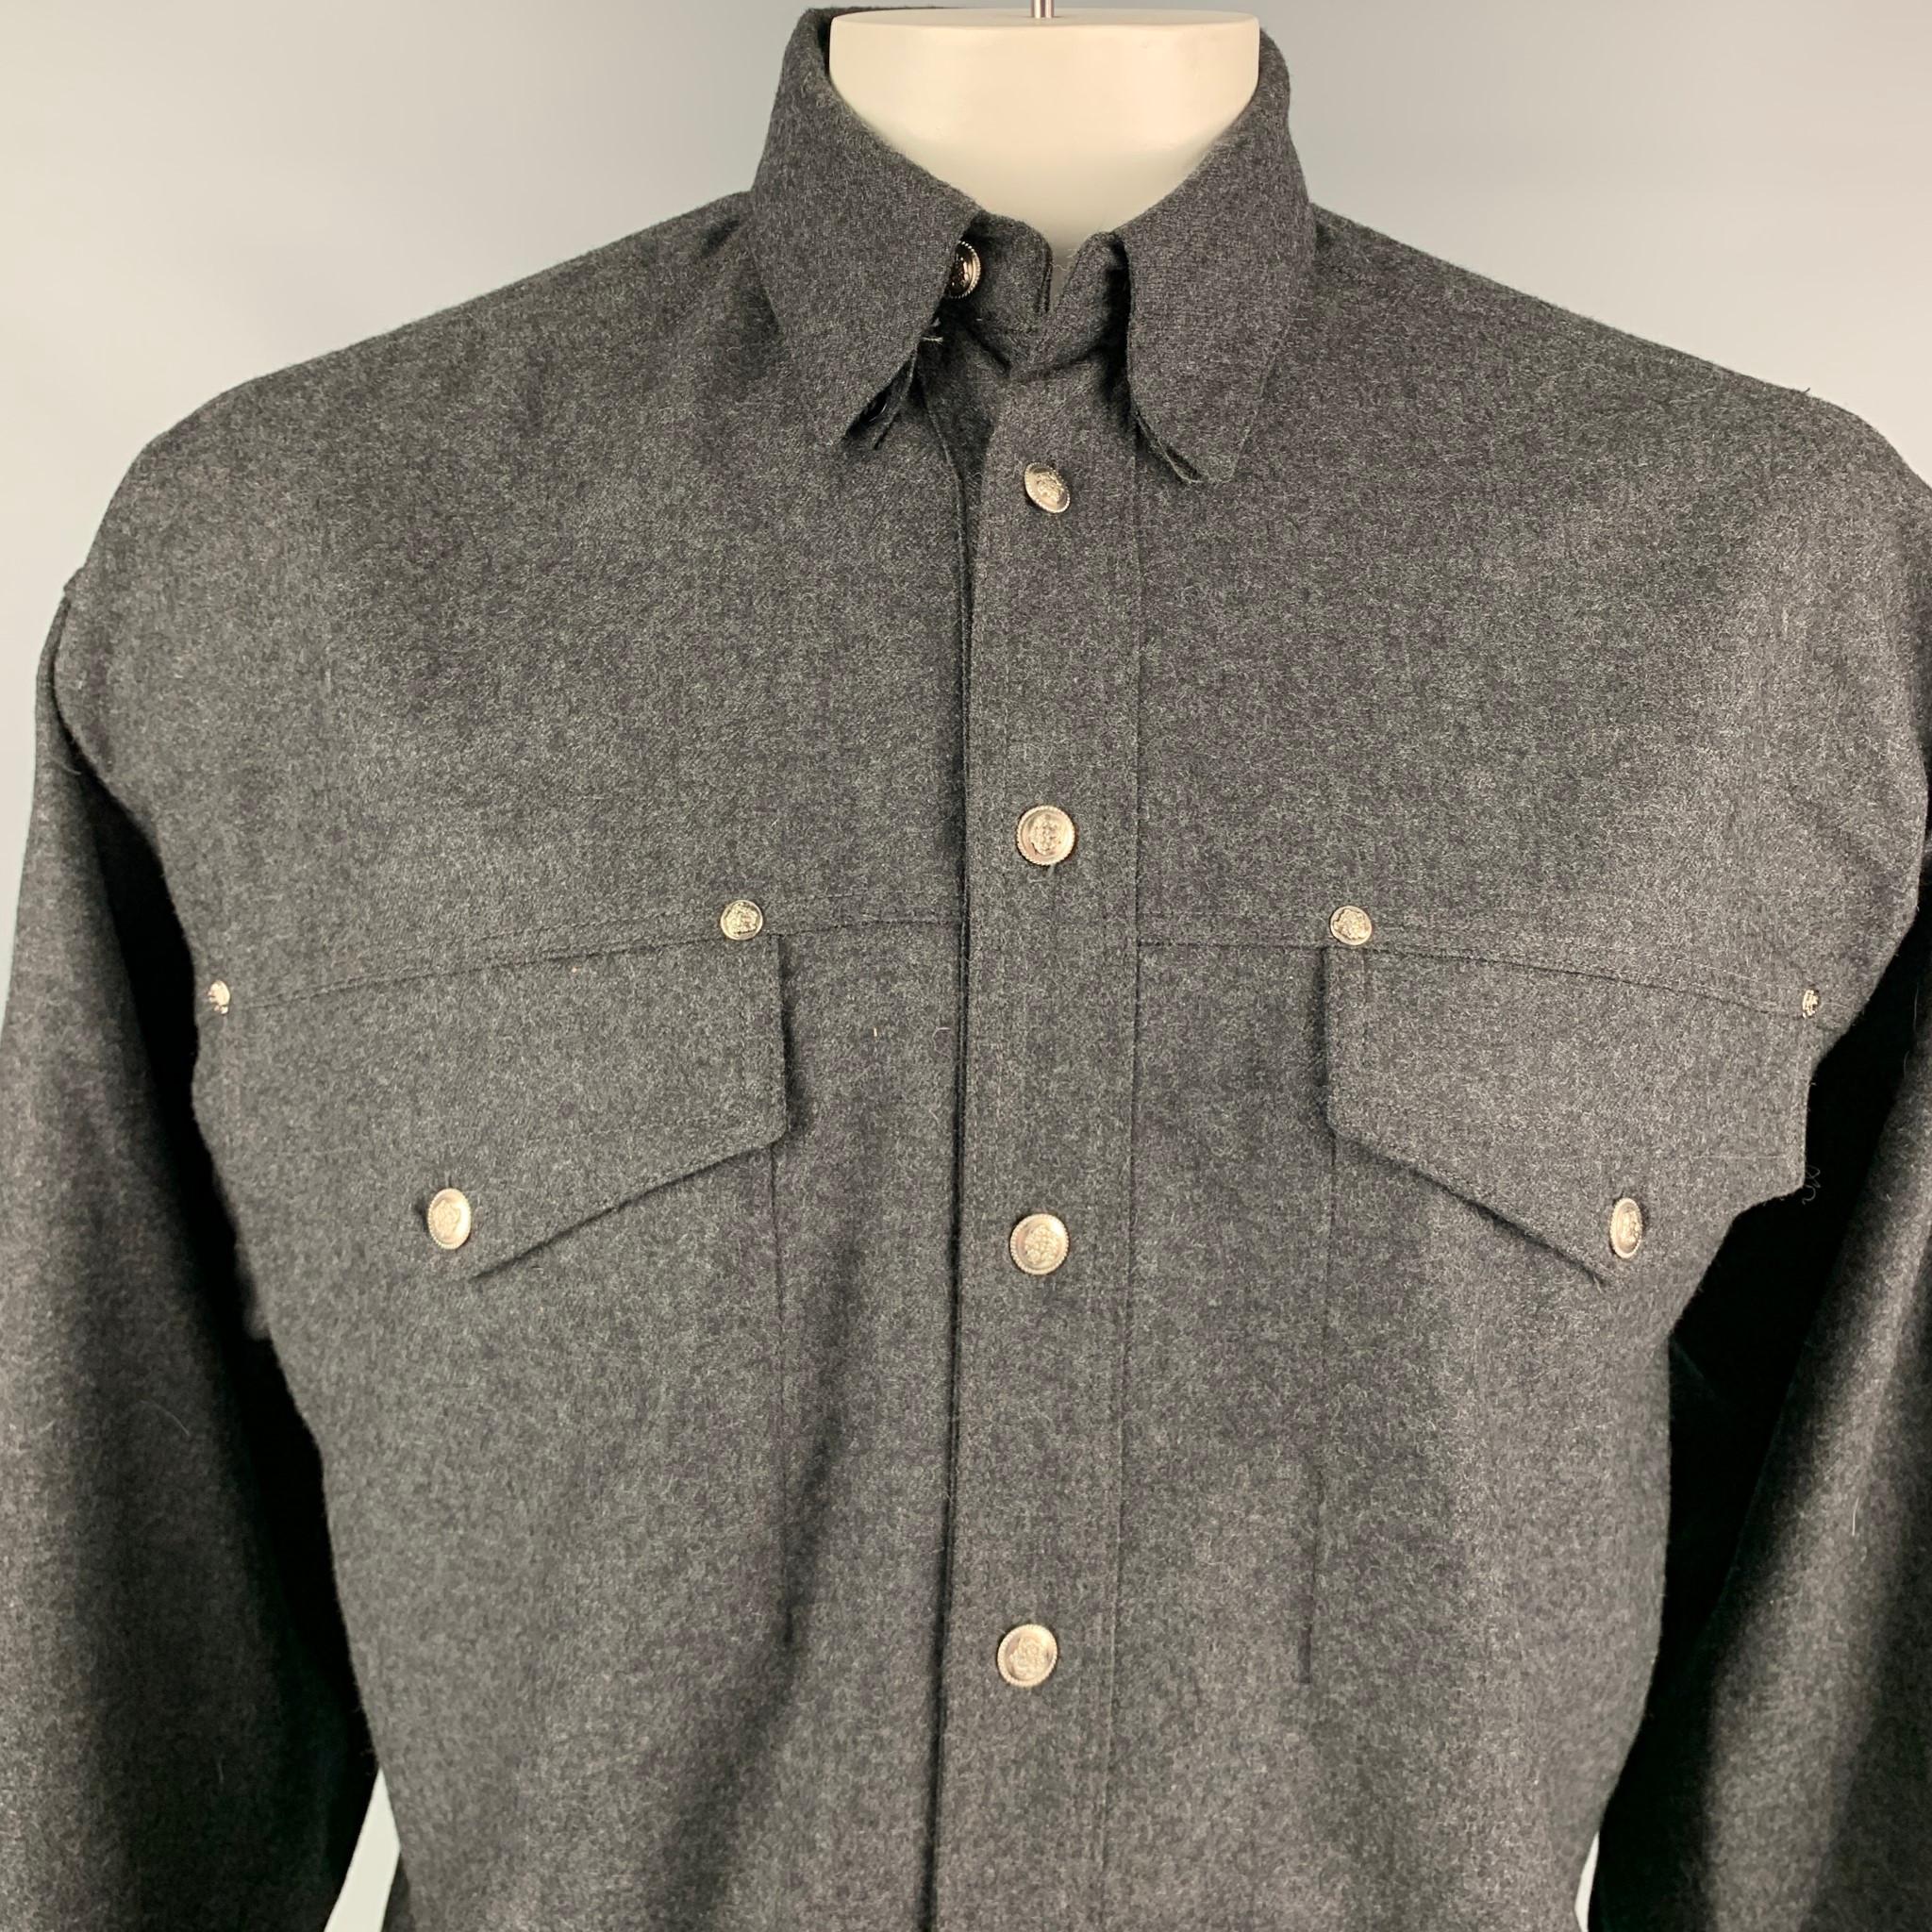 Vintage VERSACE JEANS COUTURE long sleeve shirt comes in a charcoal wool featuring a button down style, patch pockets, and a silver tone medusa head buttoned closure. 

Very Good Pre-Owned Condition.
Marked: L

Measurements:

Shoulder: 24 in.
Chest: